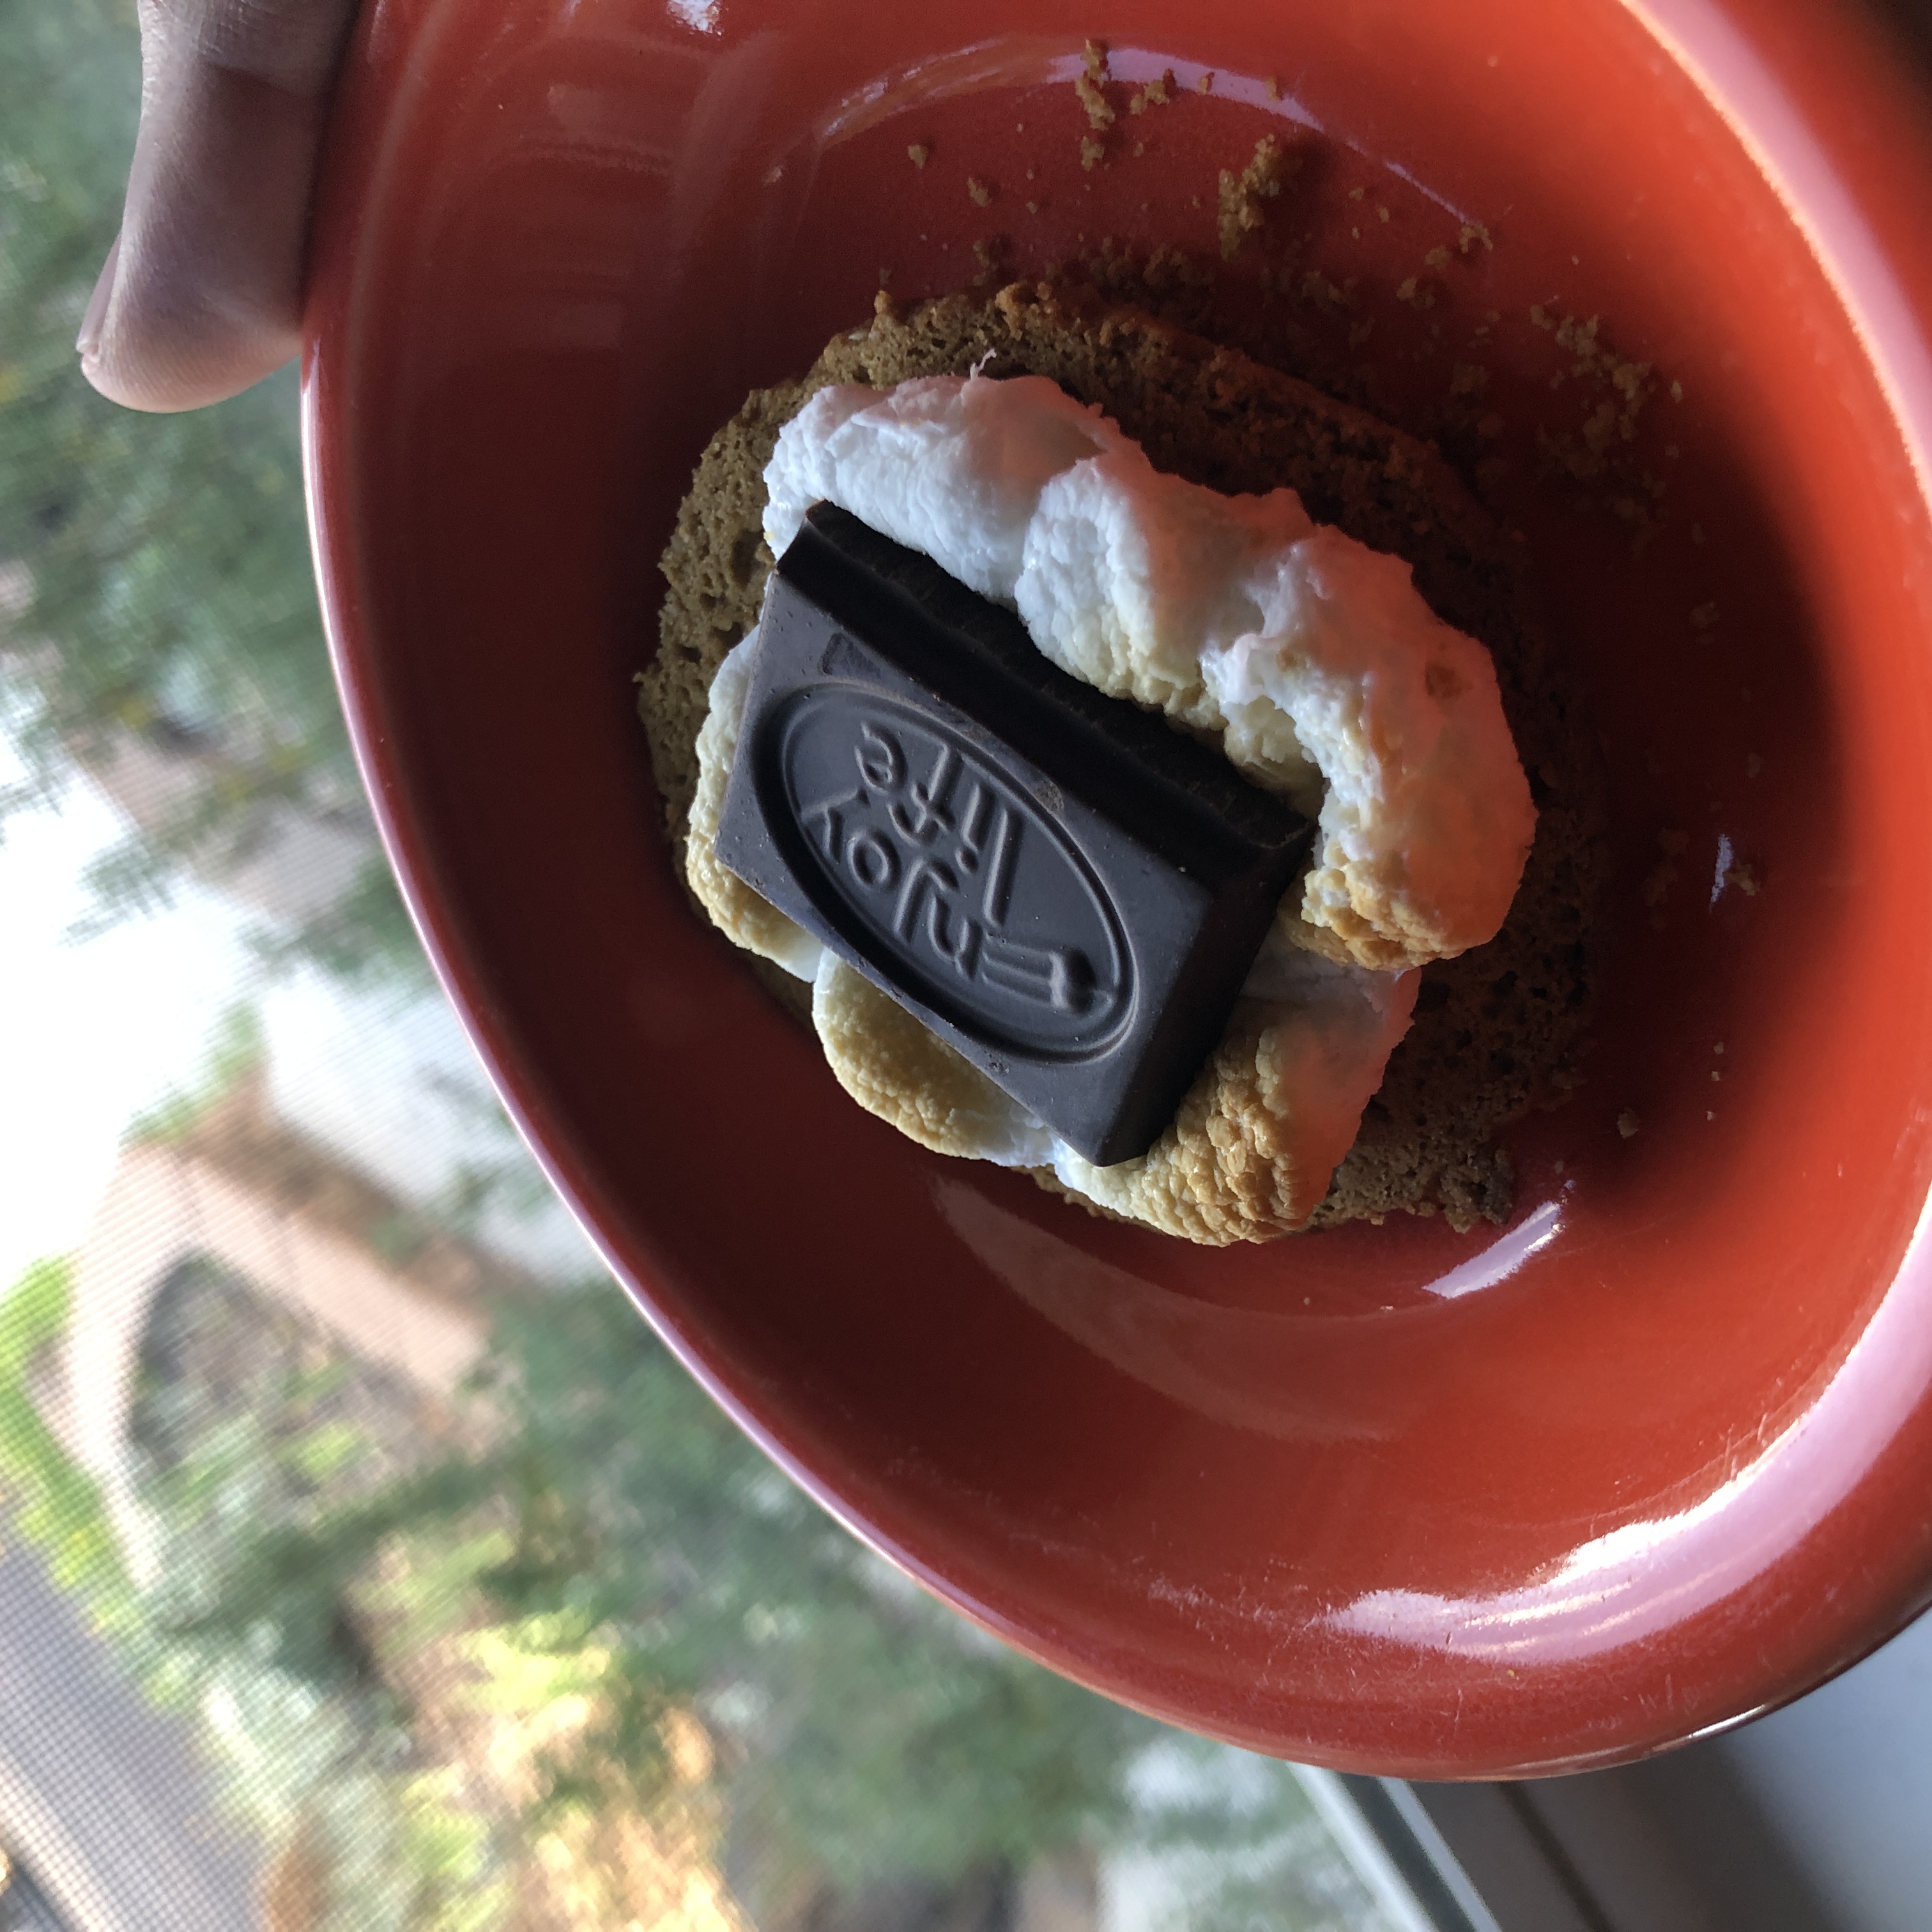 a hand holds an orange dish containing a round graham cracker, brown-toasted marshmallow, and piece of chocolate on top. The chocolate is stamped with the brand Enjoy Life.